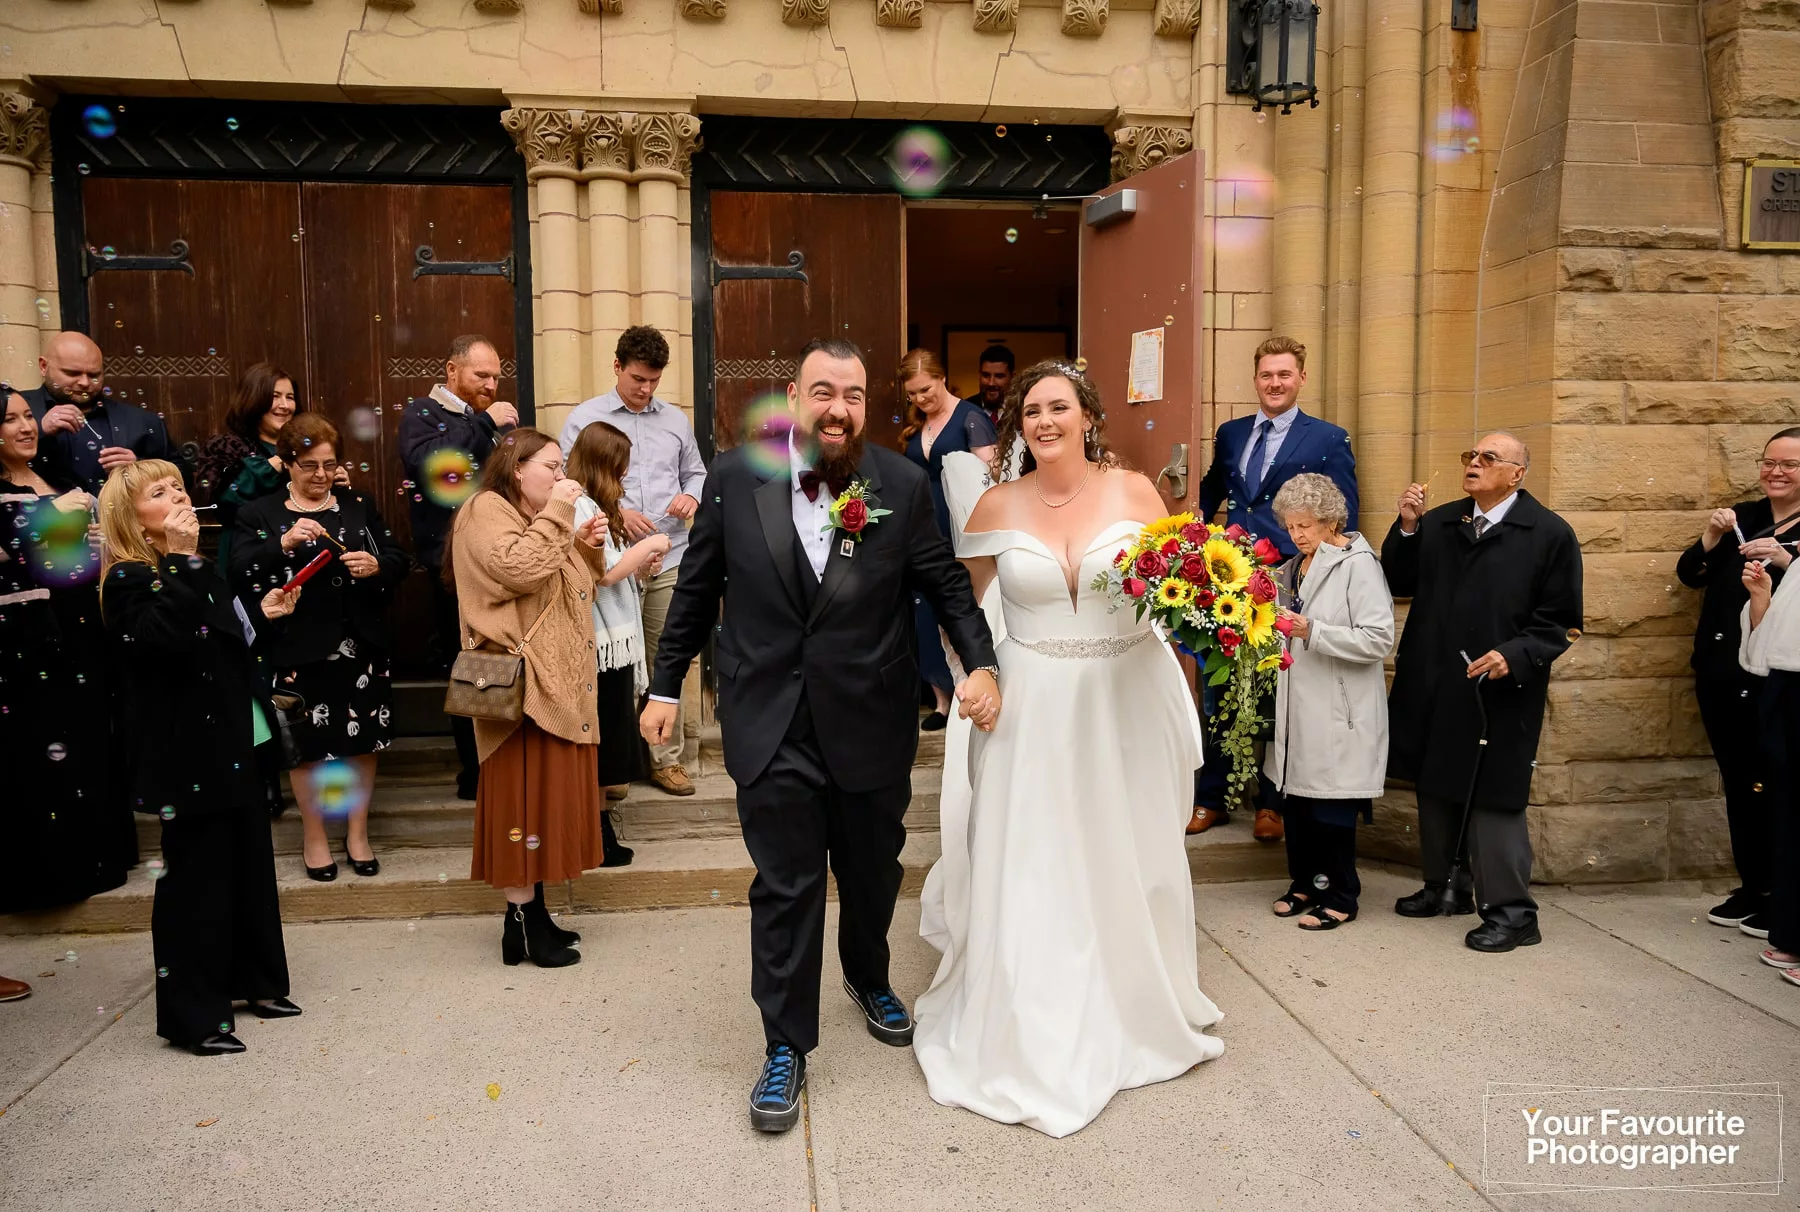 Bride and groom leaving St. George's Greek Orthodox Church in downtown Toronto, surrounded by people blowing bubbles